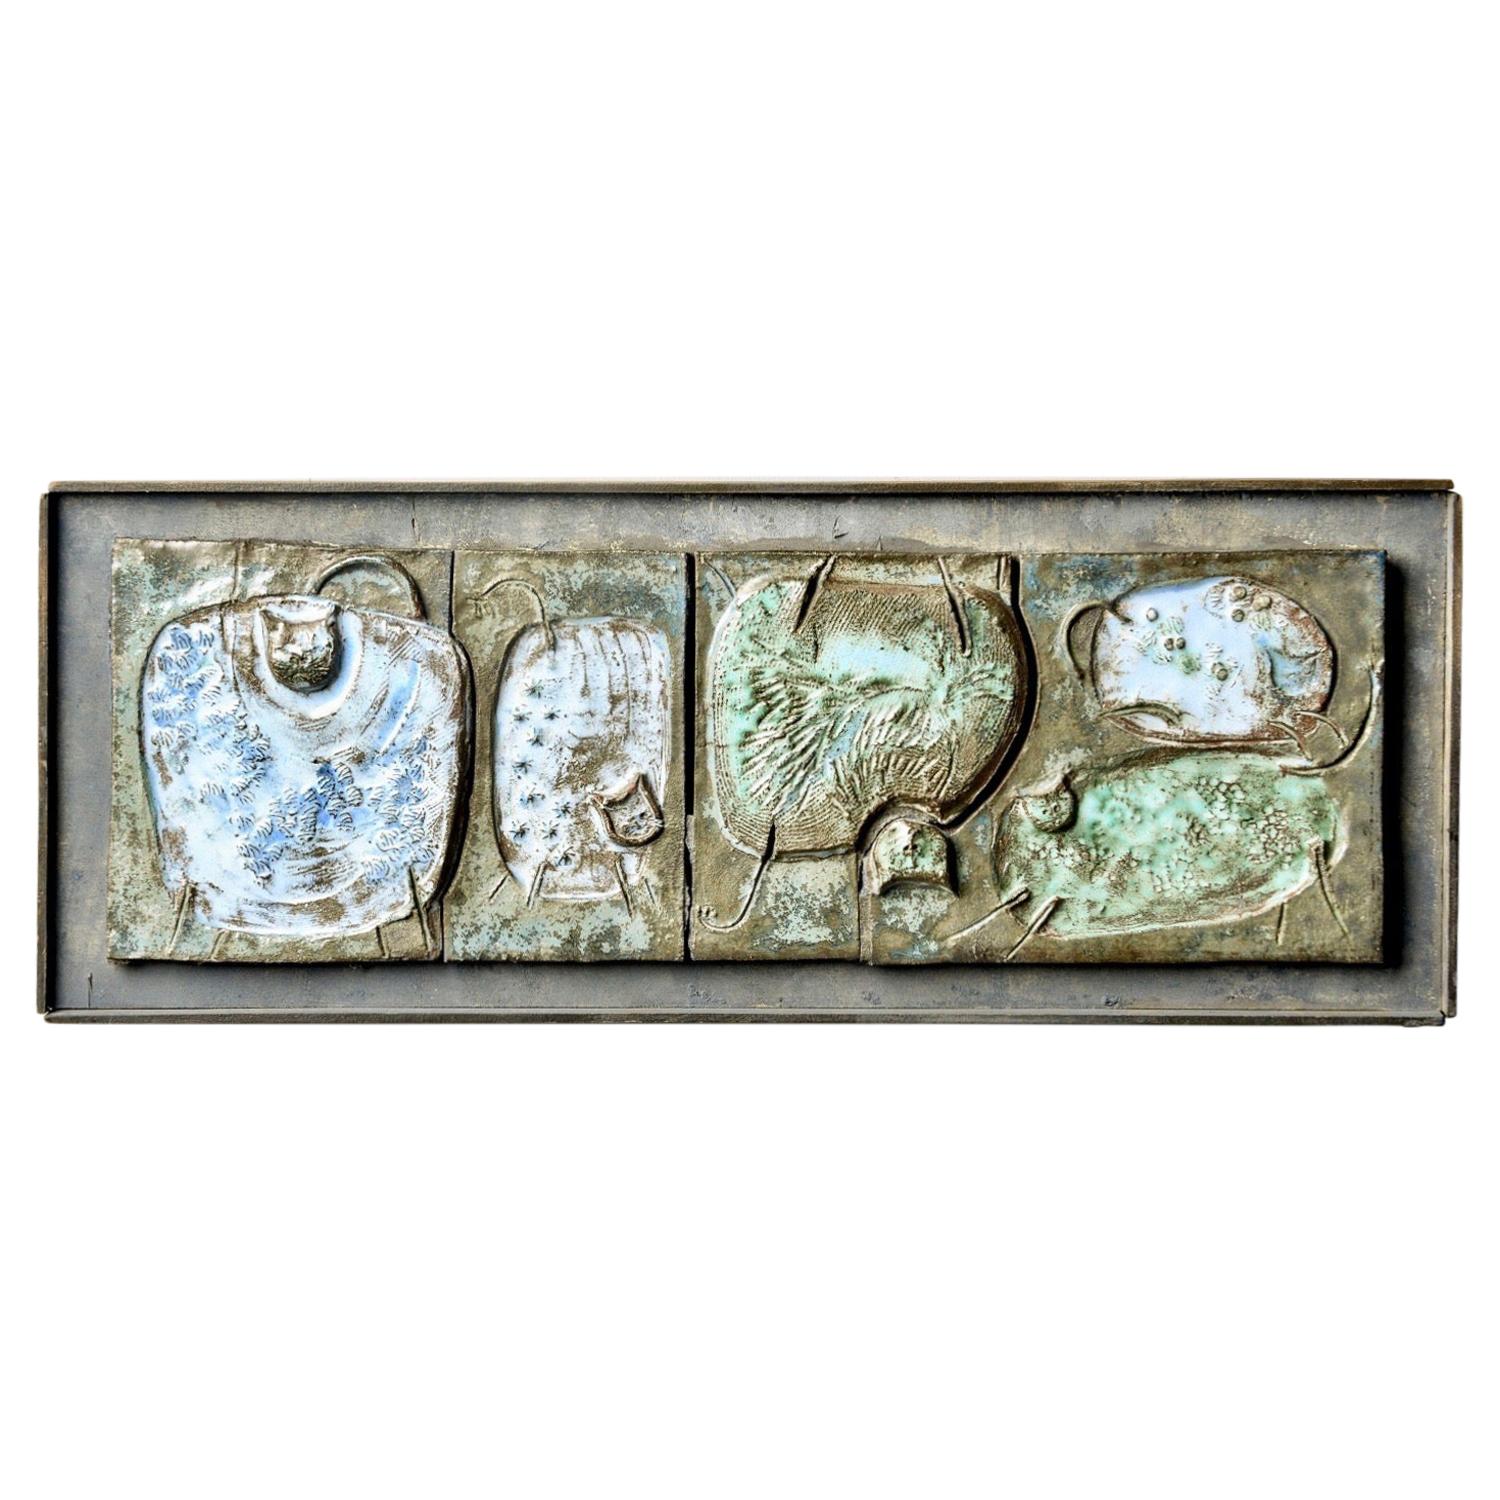 Midcentury Abstract Pottery Plaque with Cats